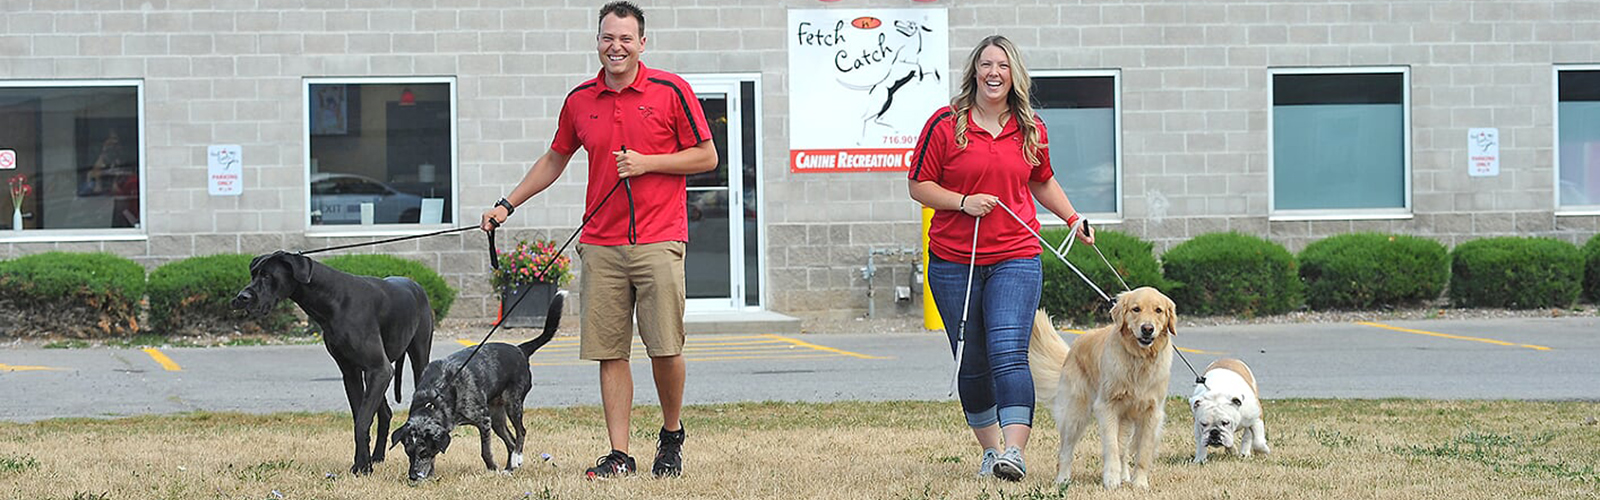 Entrepreneurial cousins Dan and Mallory Poirier walk a foursome of clients in front of their dog daycare, Fetch n’ Catch, 6517 Transit Rd., Bowmansville.